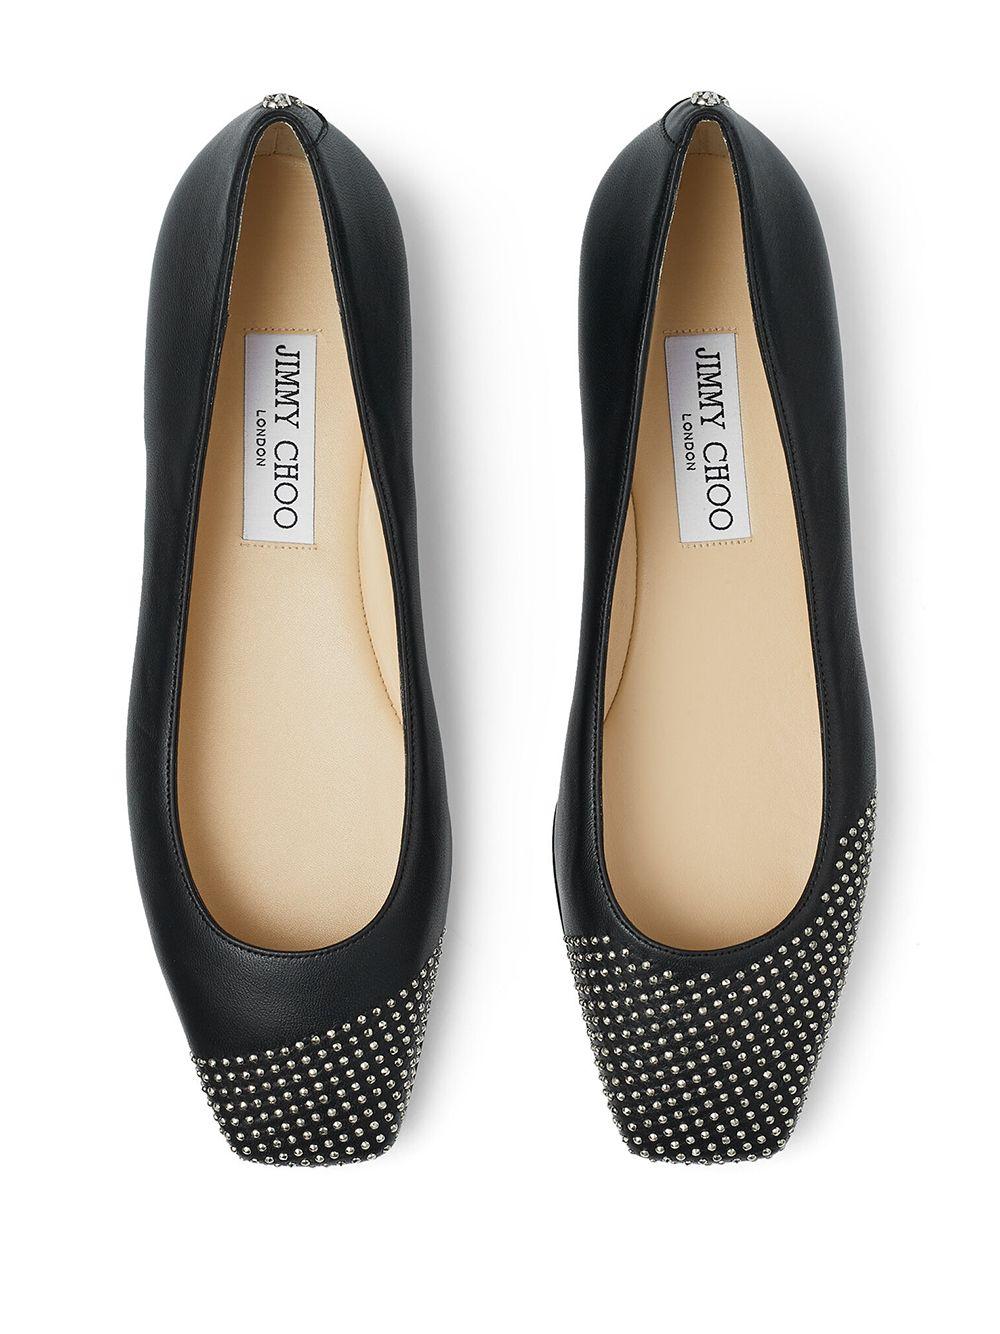 Jimmy Choo Davia Square-toe Studded Leather Ballet Flats in Black 